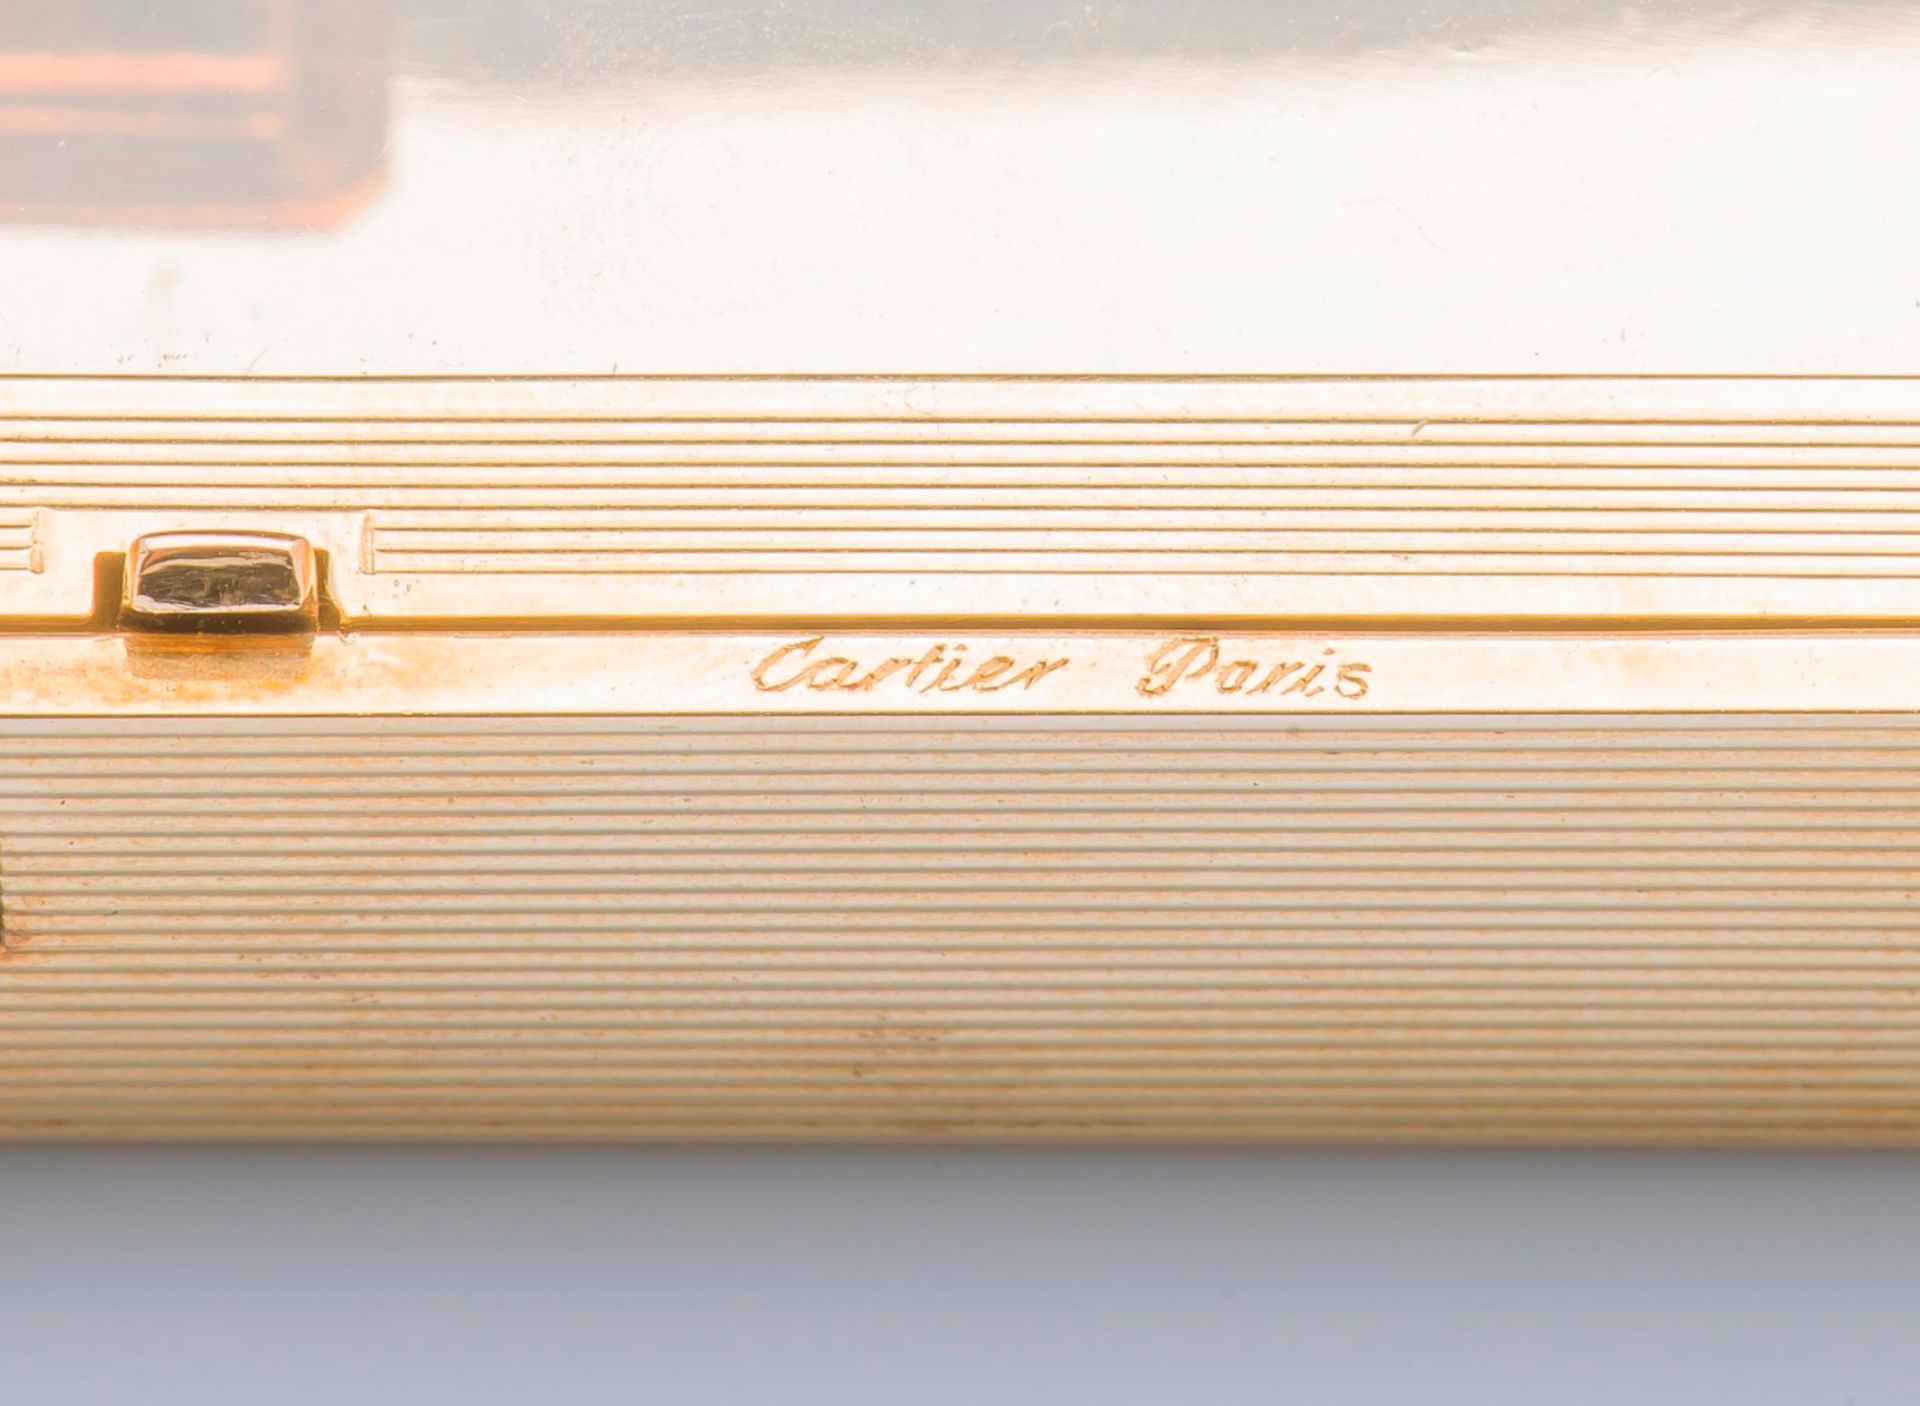 CARTIER, IMPORTANT 18 CT GOLD AND DIAMOND VANITY CASE. - Image 3 of 3